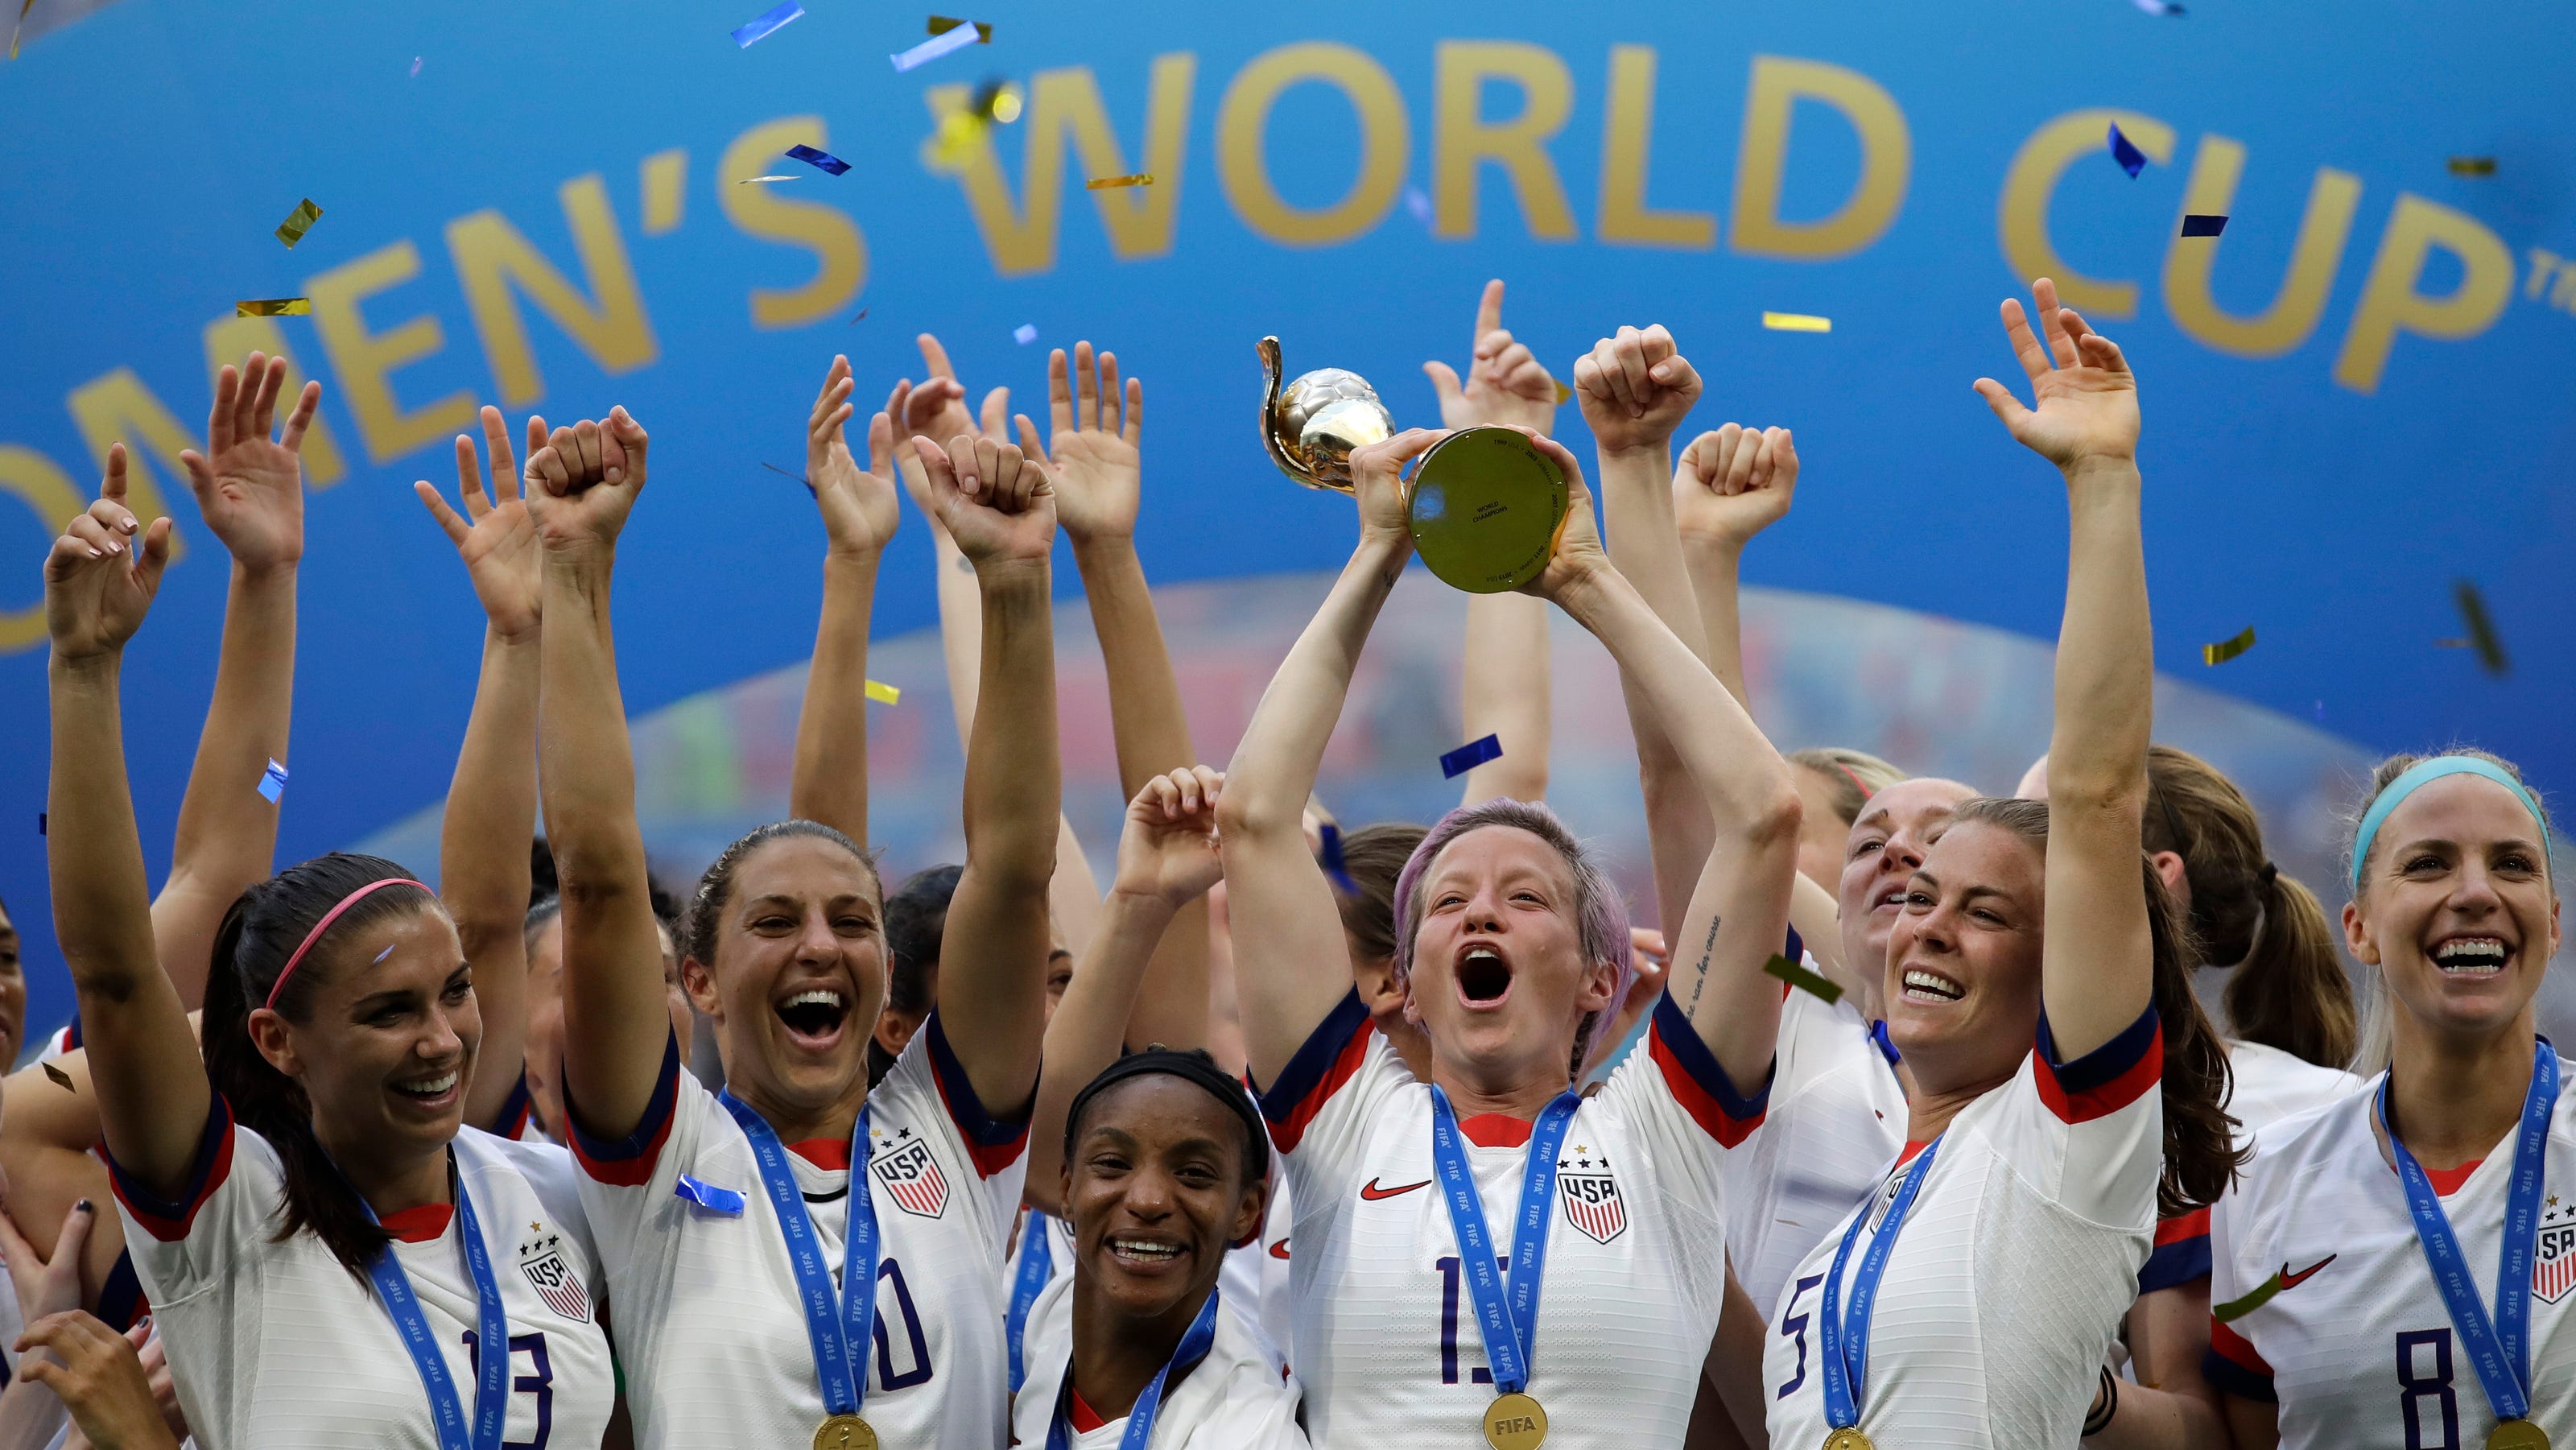 Uswnt Reaches Landmark Deal With Us Soccer To Ensure Equal Pay As Men